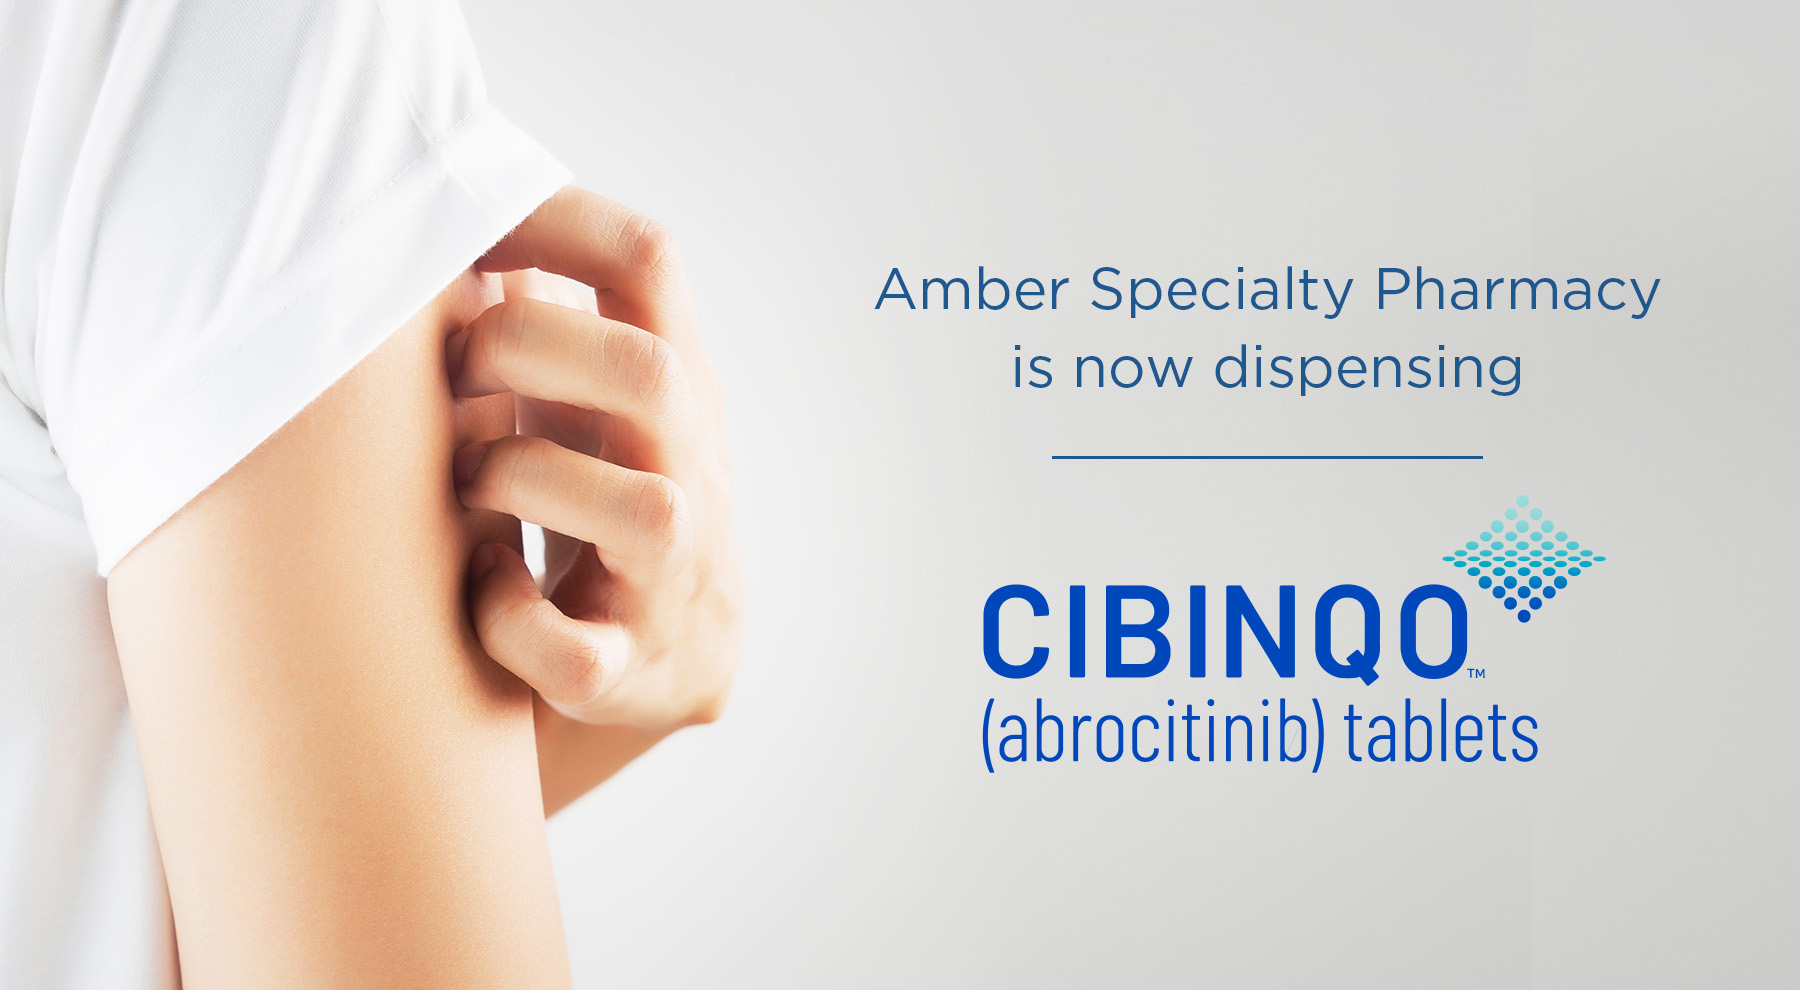 Amber Specialty Pharmacy will begin dispensing CIBINQO for Atopic Dermatitis.